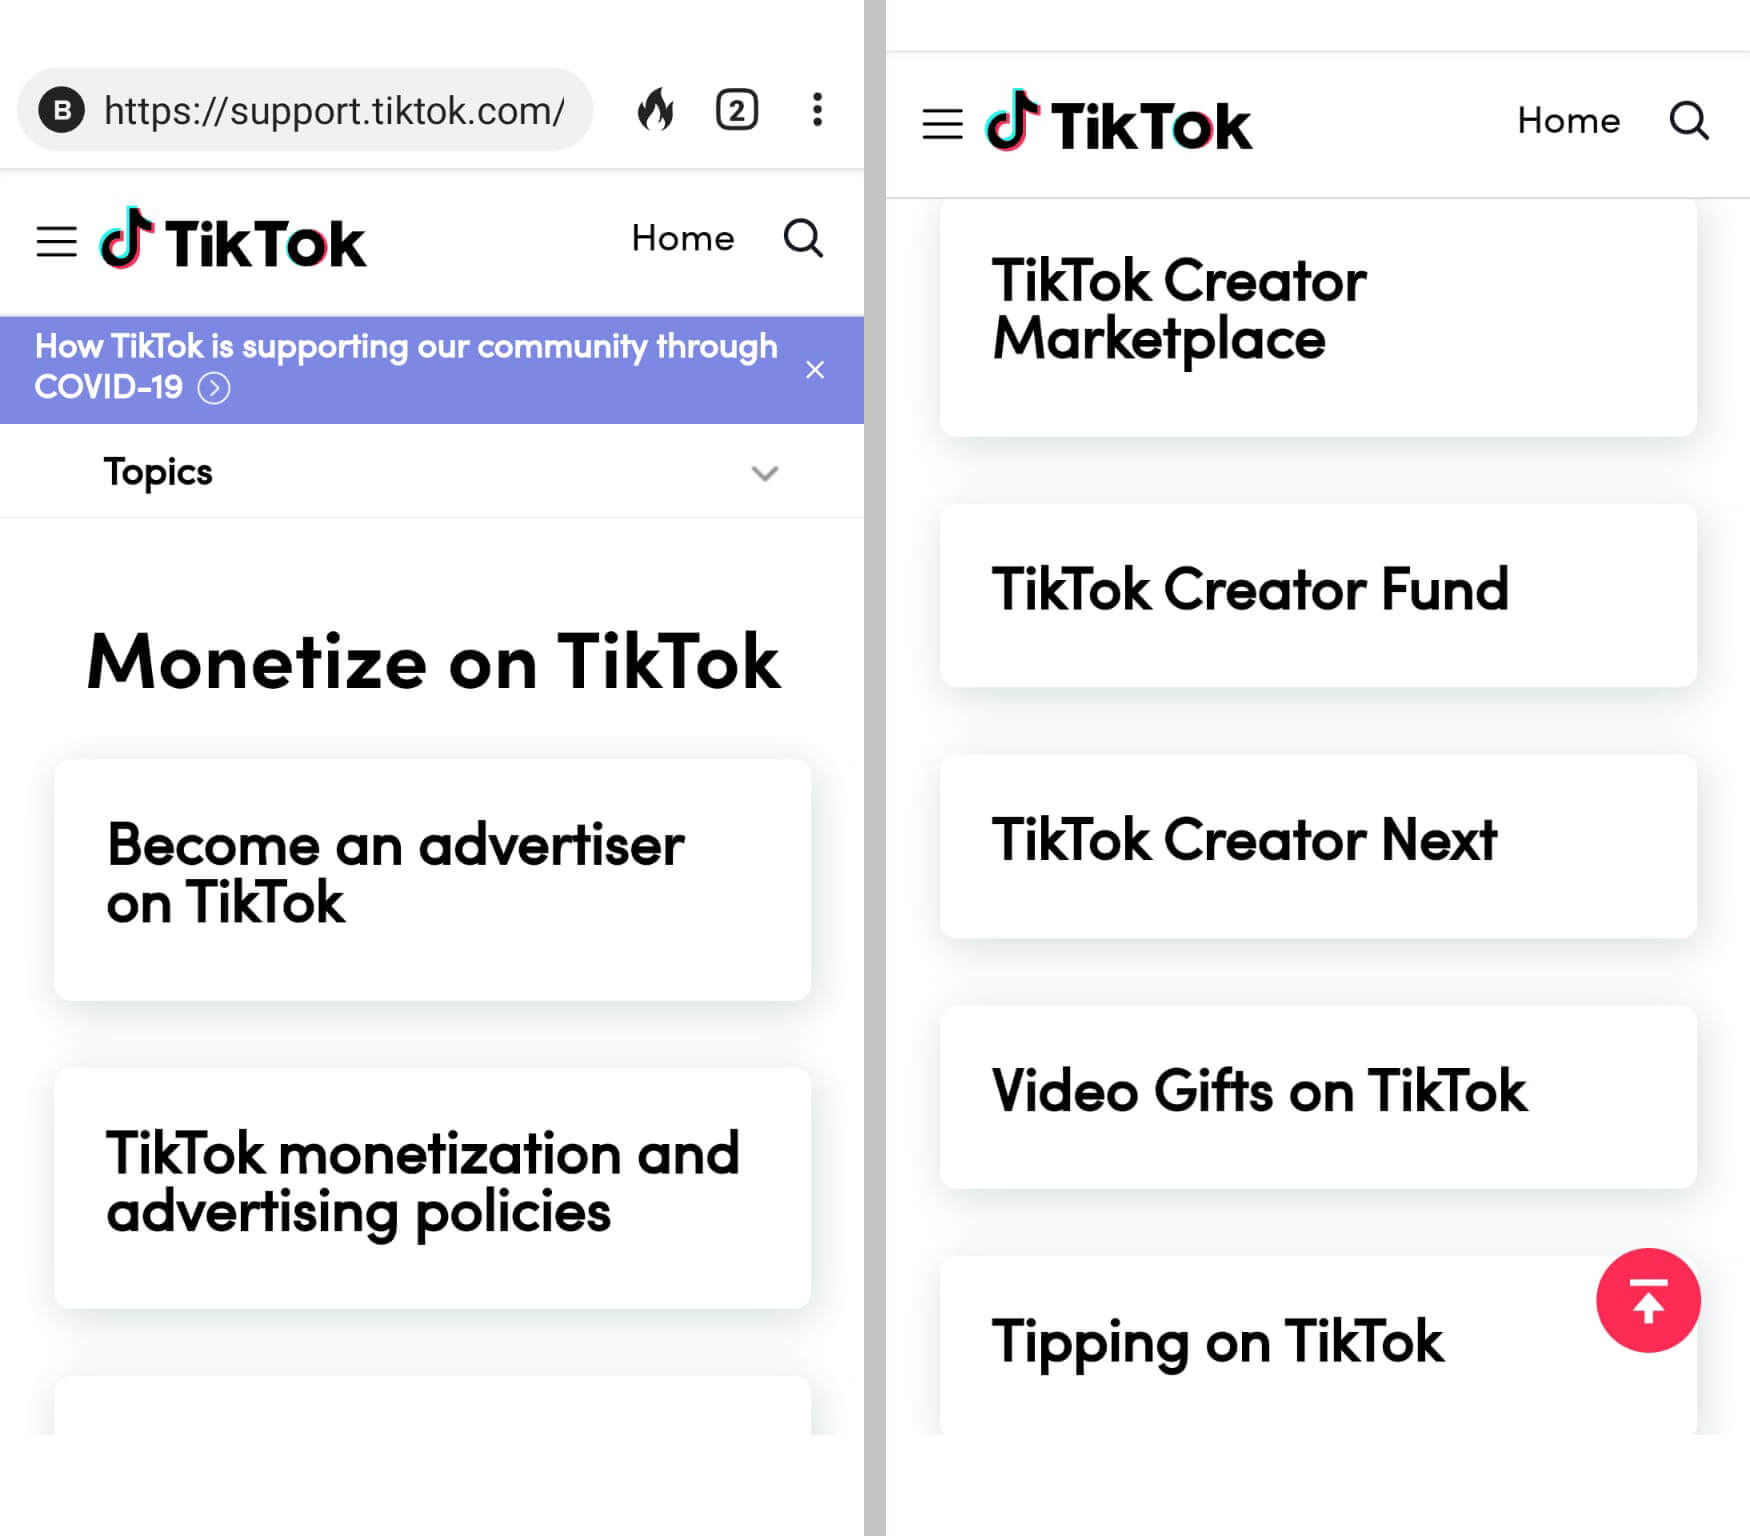 how-to-develop-a-tiktok-video-content-strategy-what-is-your-goal-monetization-advertising-creatror-fund-video-gifts-tipping-example-2